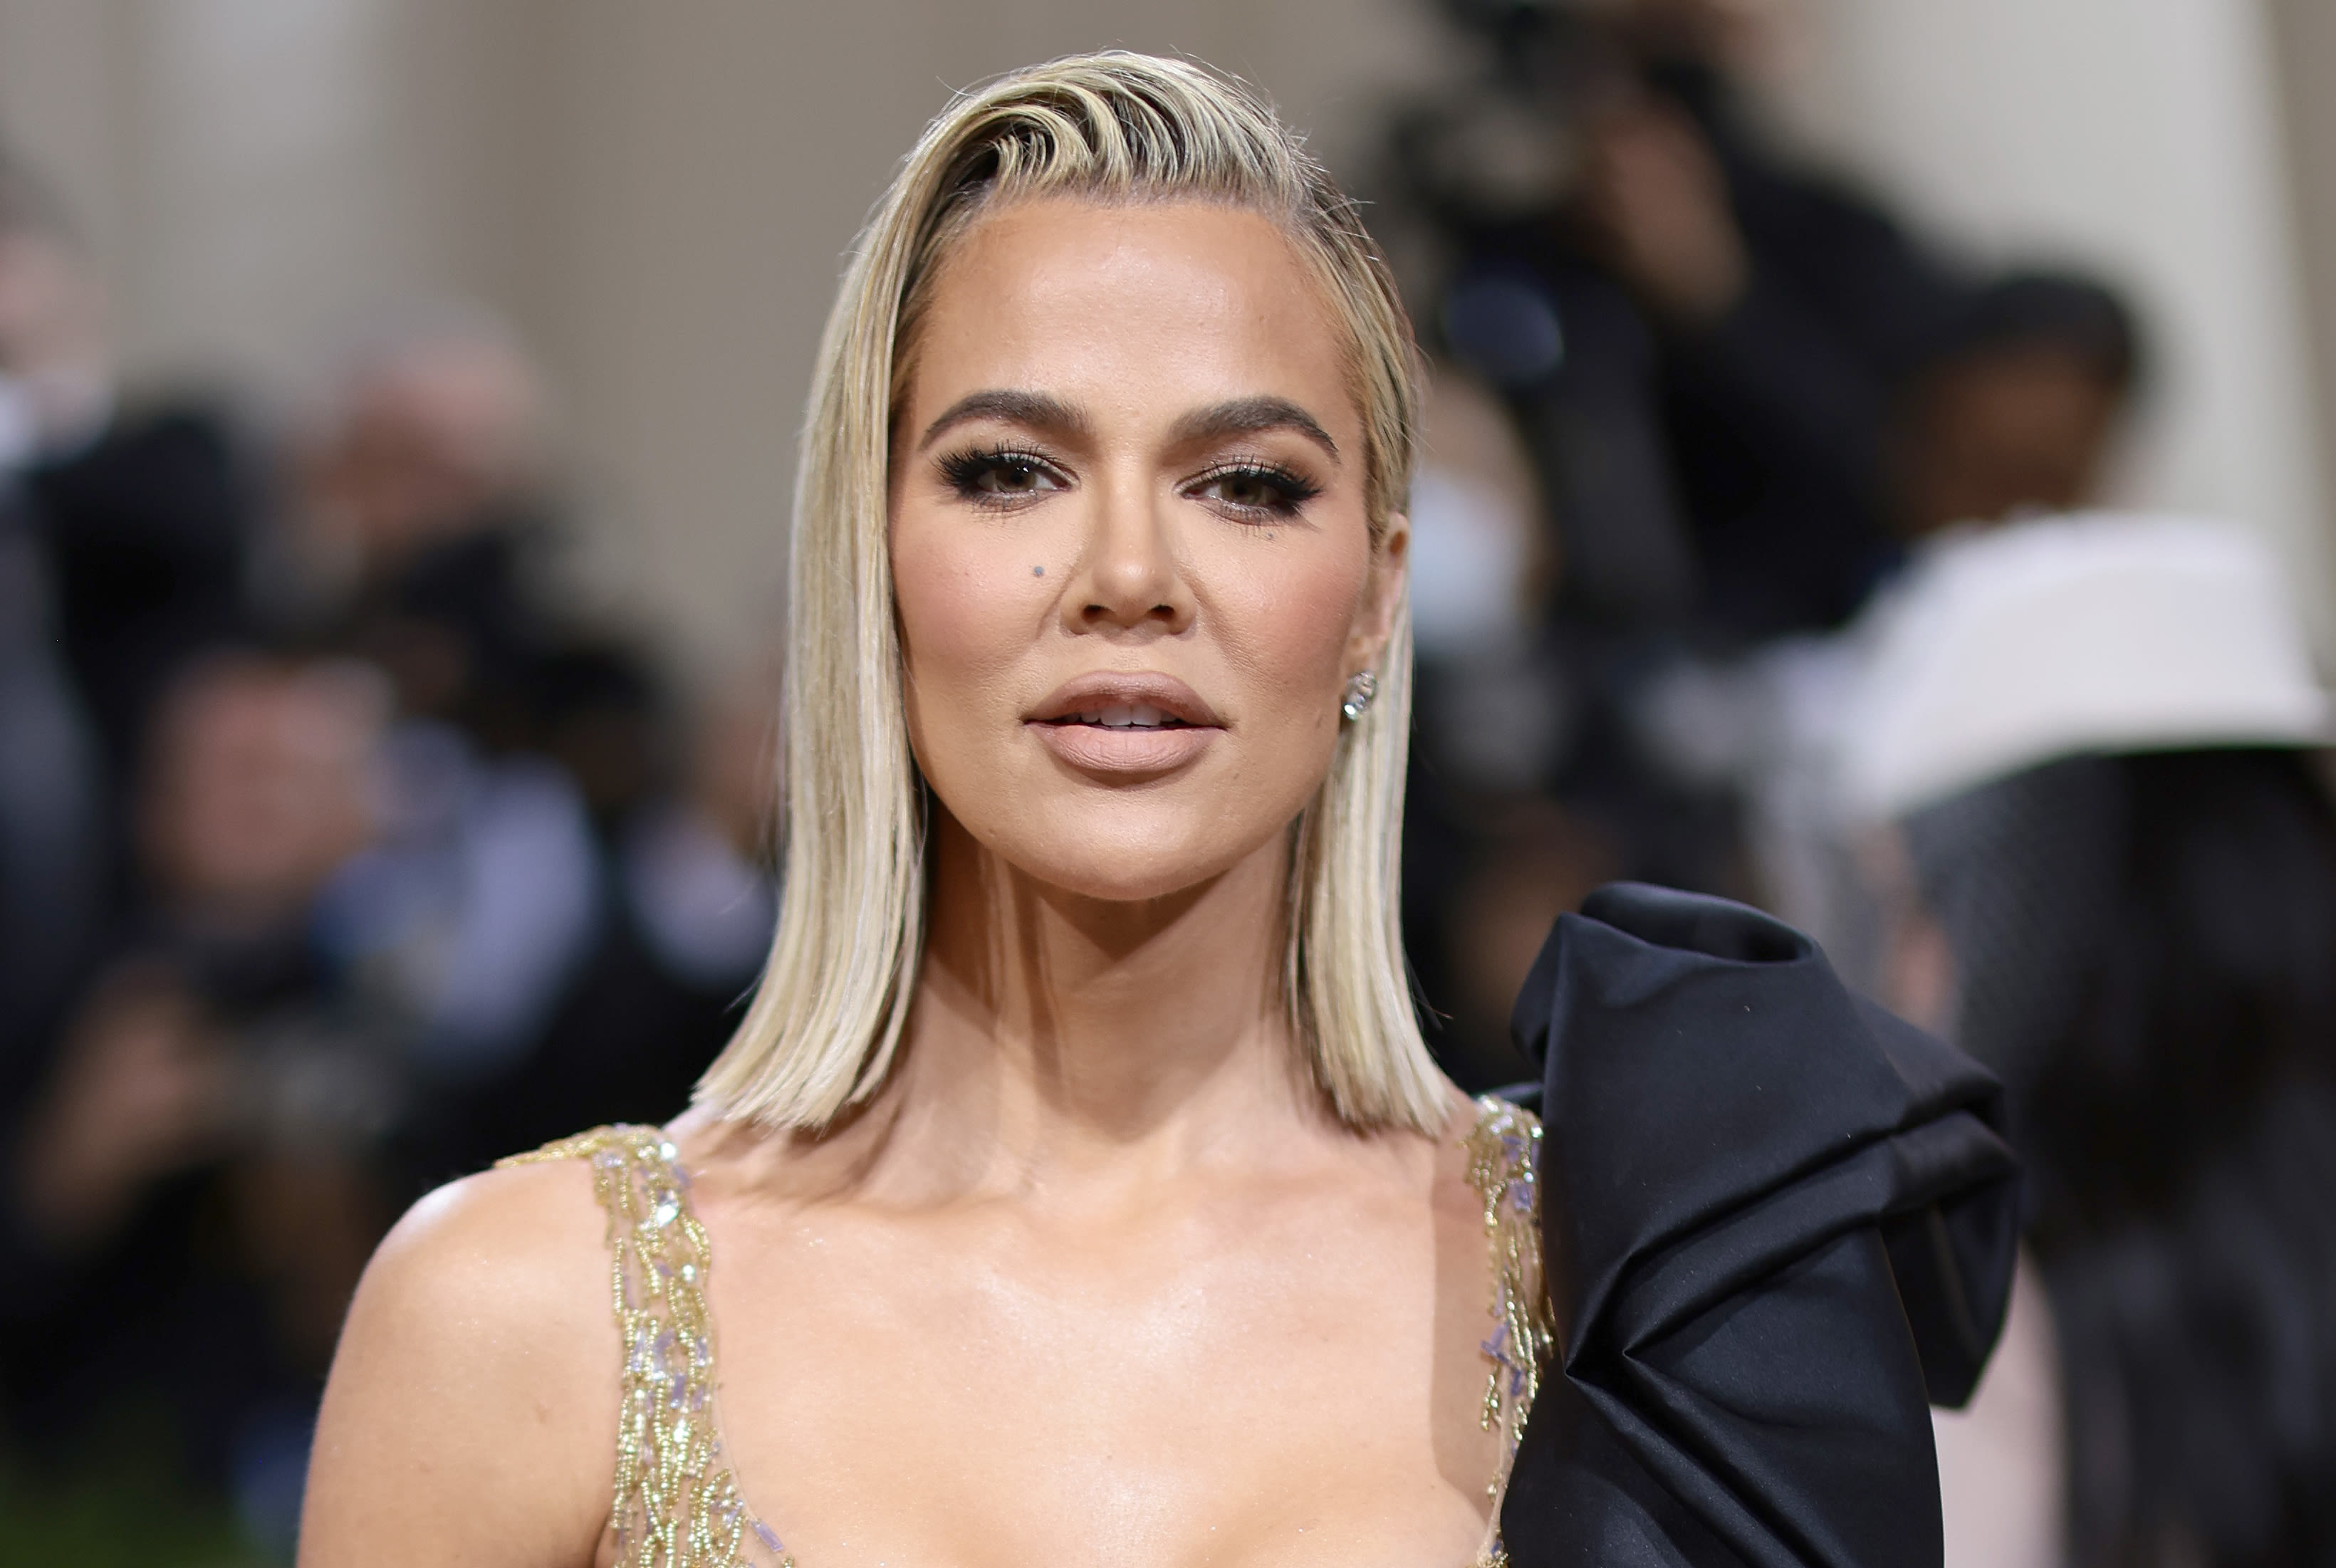 Khloé Kardashian Says She’s ‘Exhausted’ as a ‘Hands-On’ Parent — & Our Eyebrows Are Raised to the Ceiling